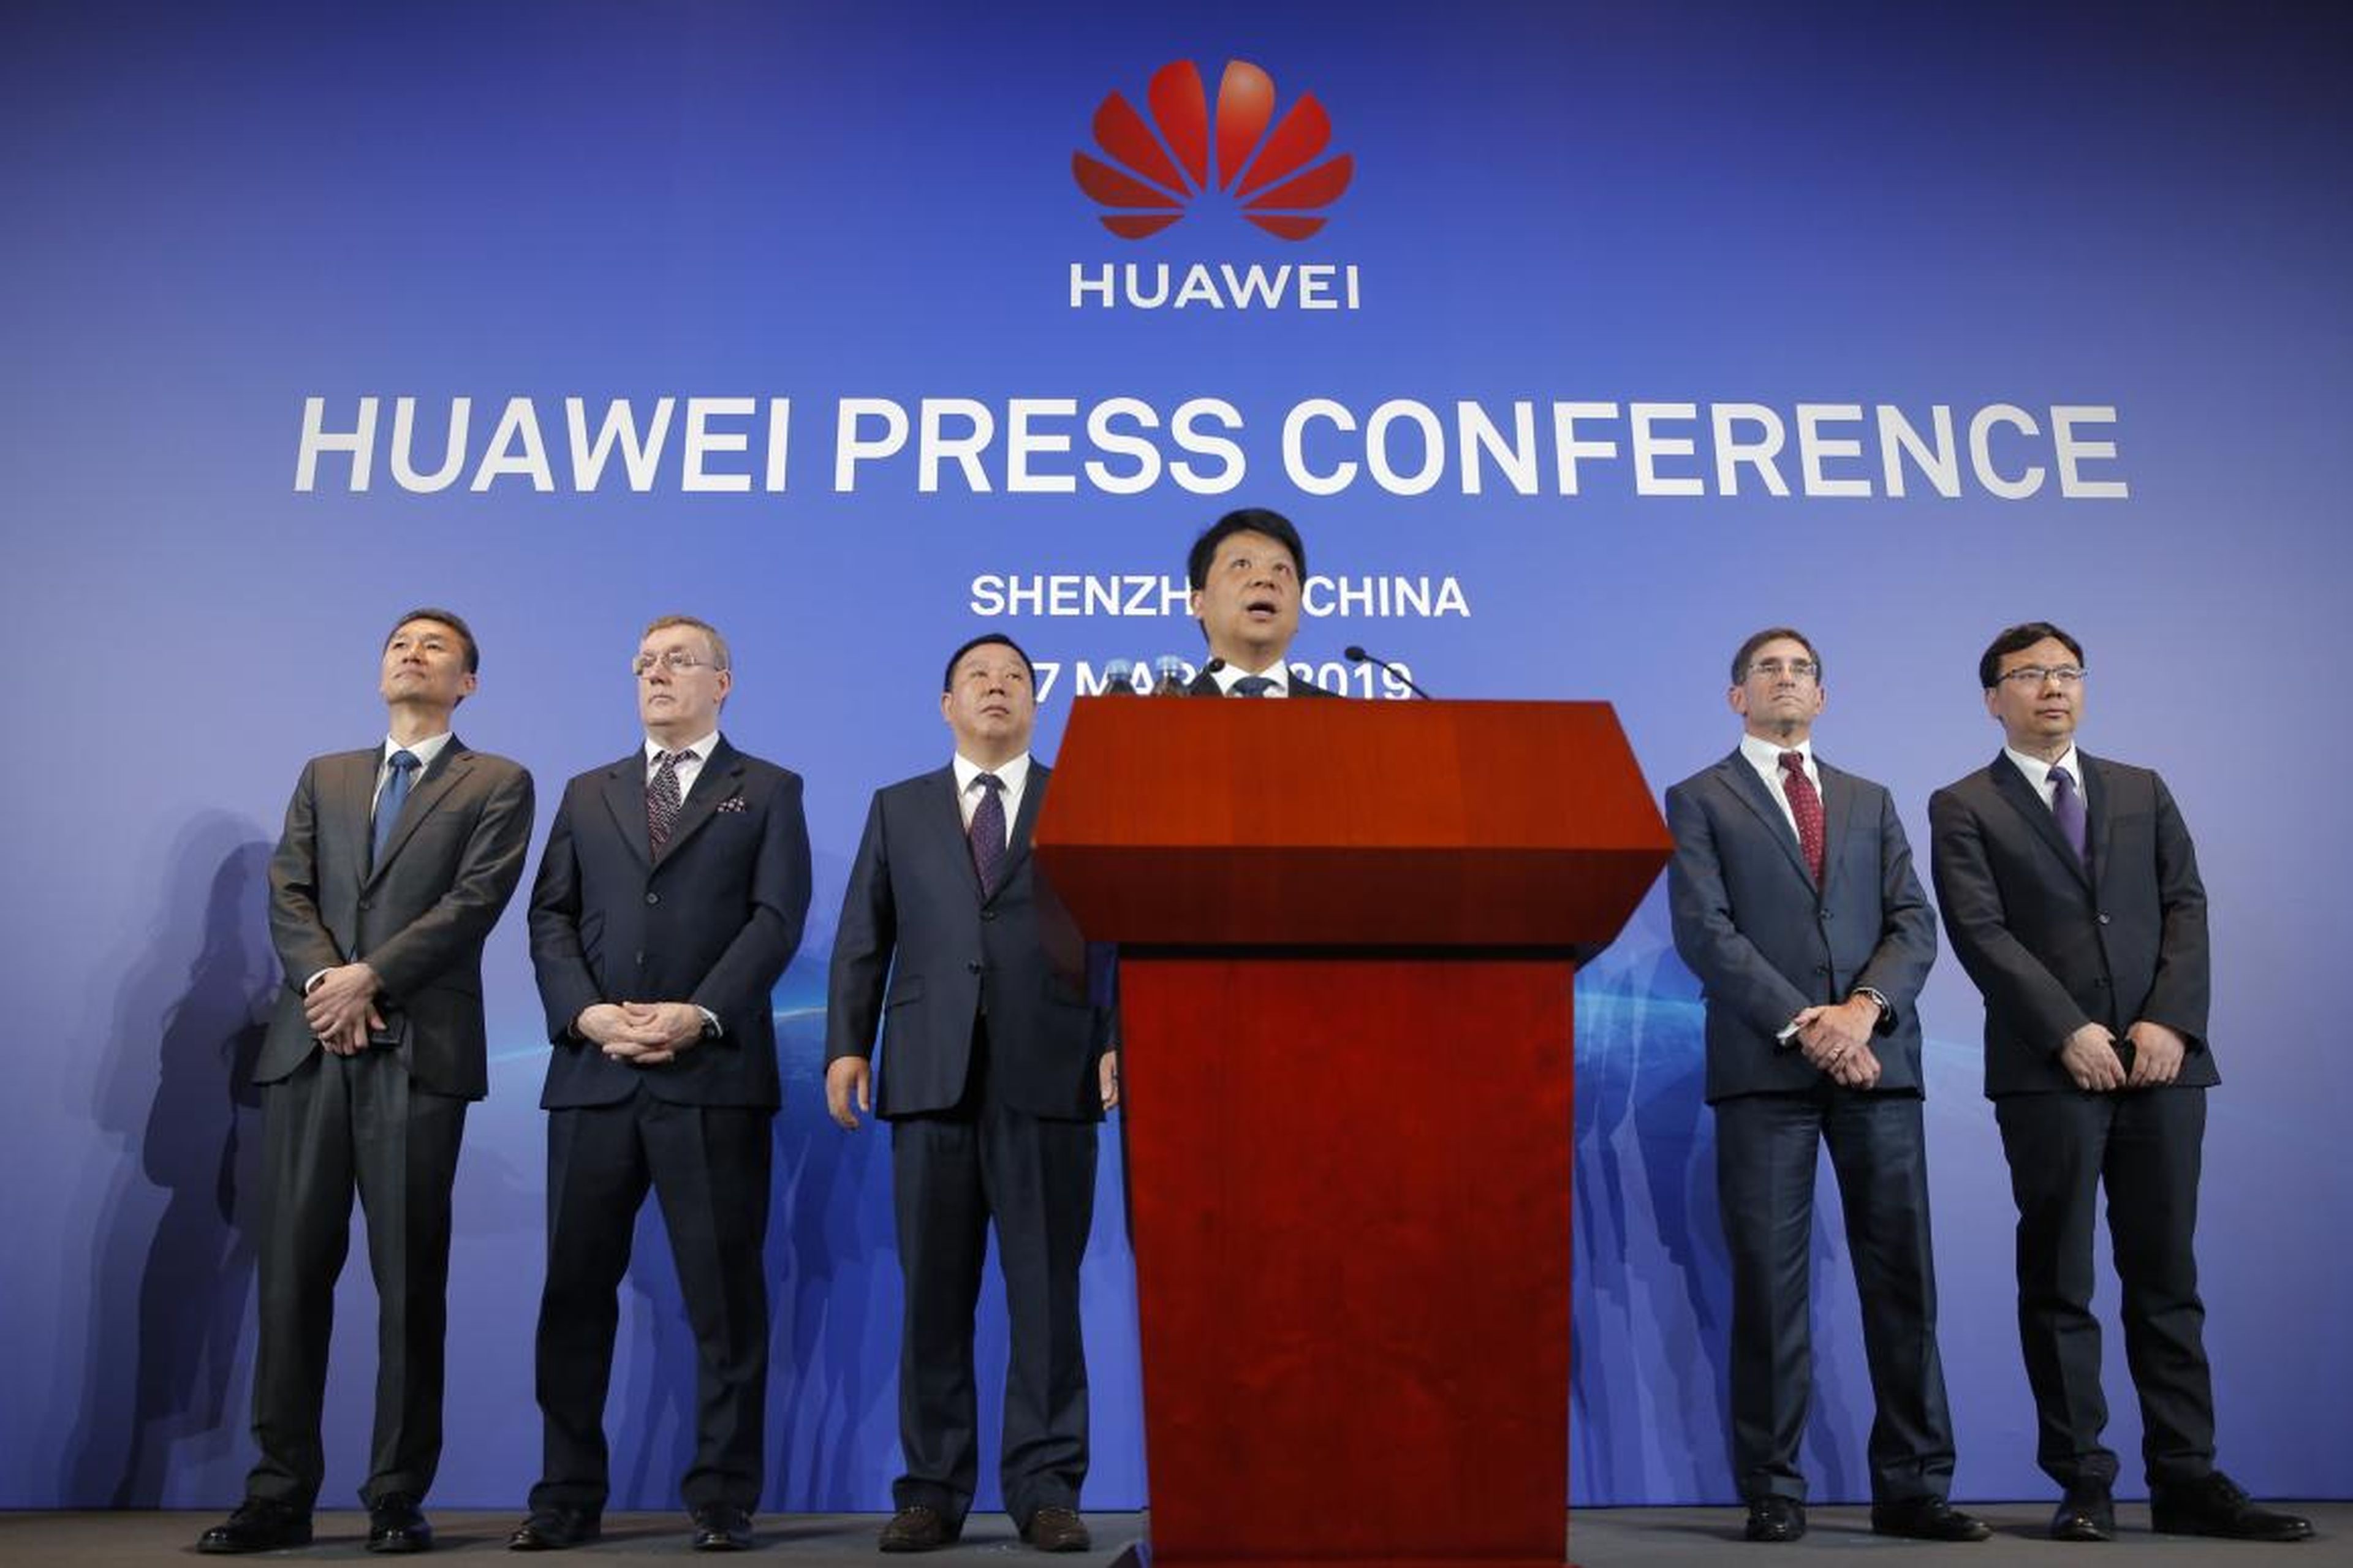 Huawei Rotating Chairman Guo Ping, center, speaks in front of other executives during a press conference in Shenzhen, China's Guangdong province.